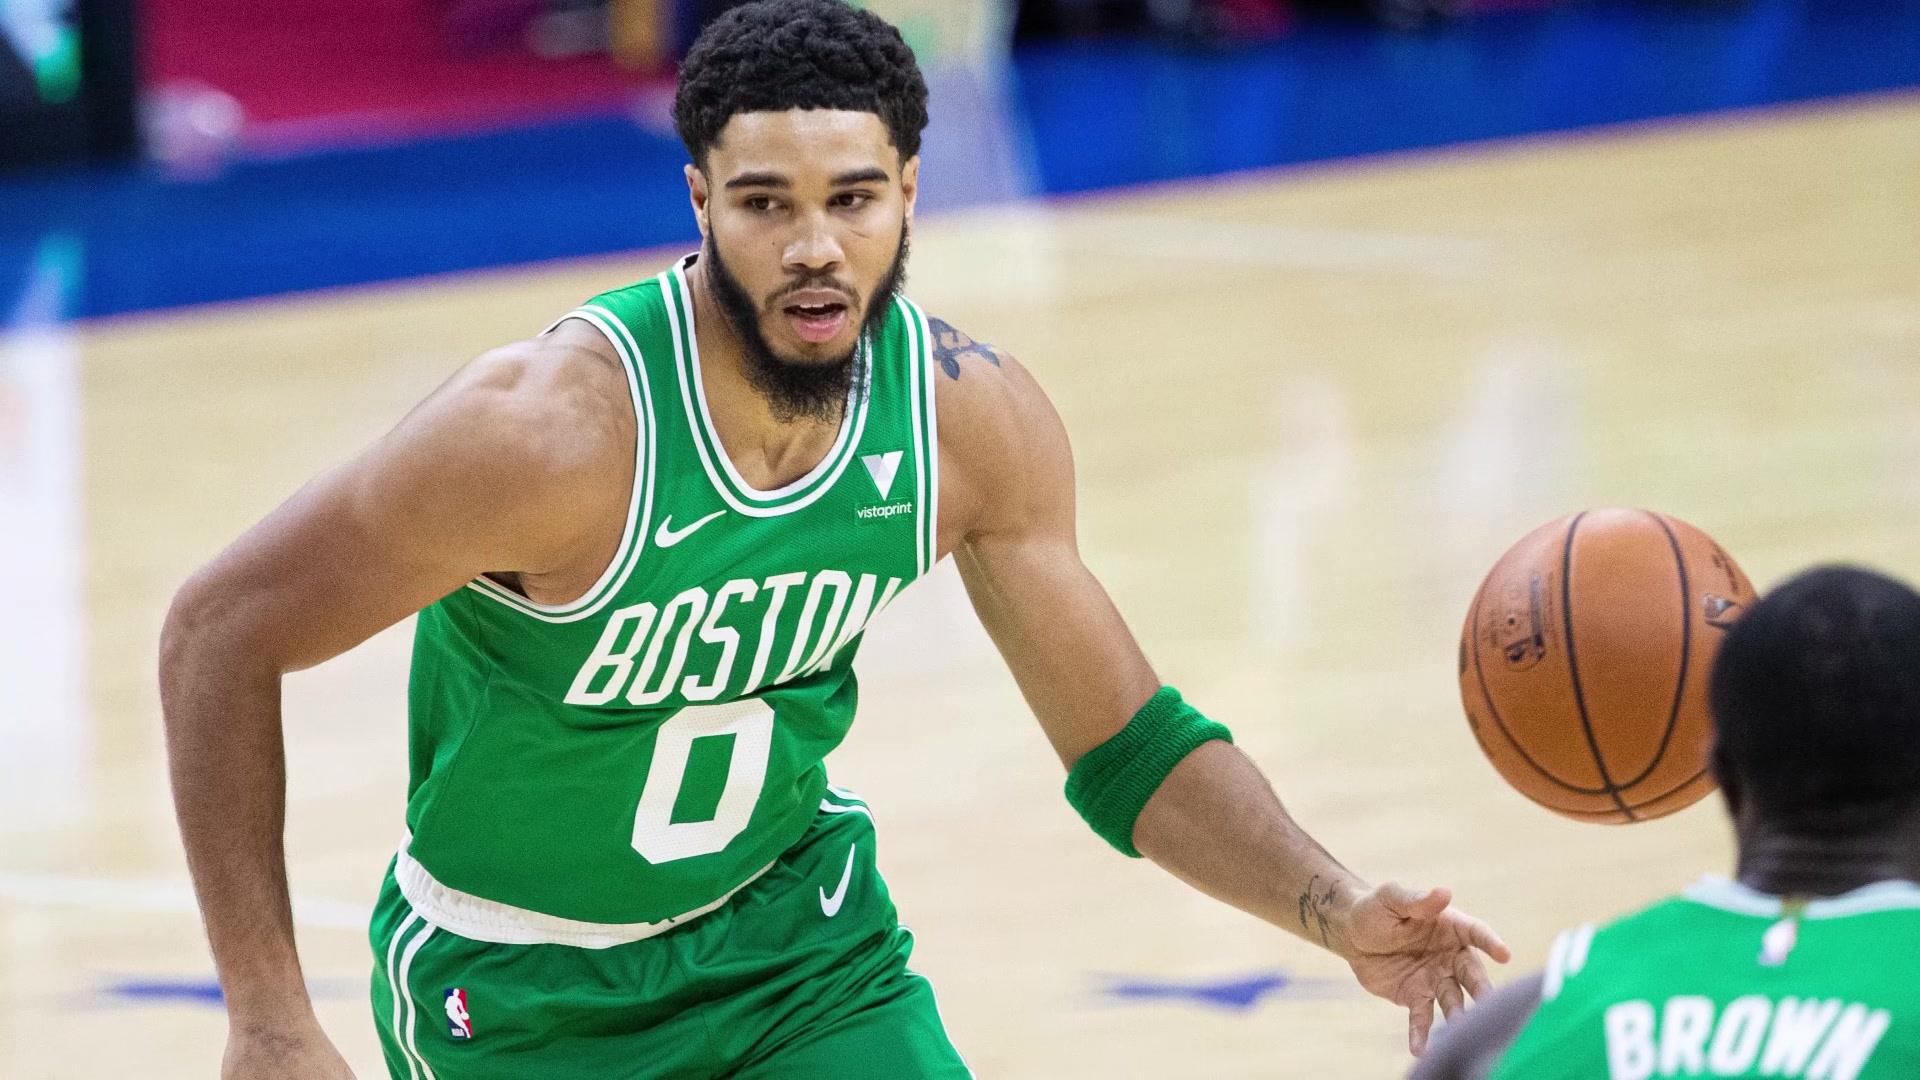 First game of preseason: 10 Takeaways from Celtics/Sixers - CelticsBlog